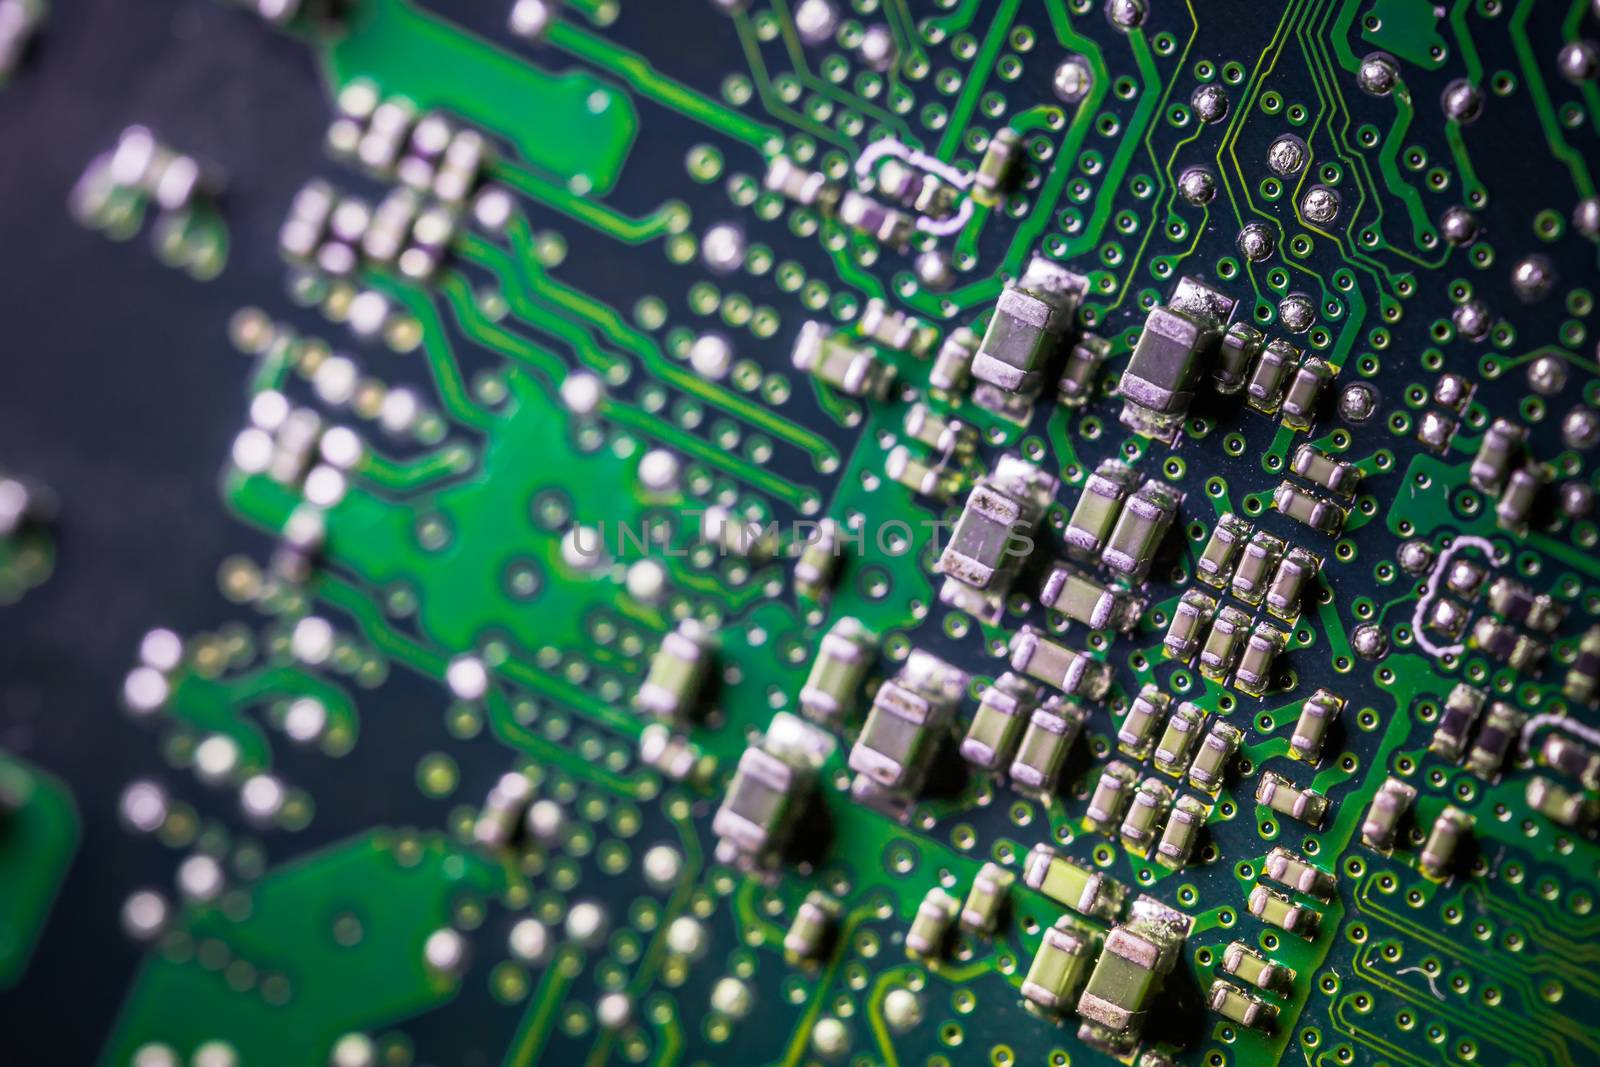 Circuit board. Electronic computer hardware technology. Motherboard digital chip. Tech science background. Integrated communication processor. SMD resistors and capacotors. Green PCB. by petrsvoboda91